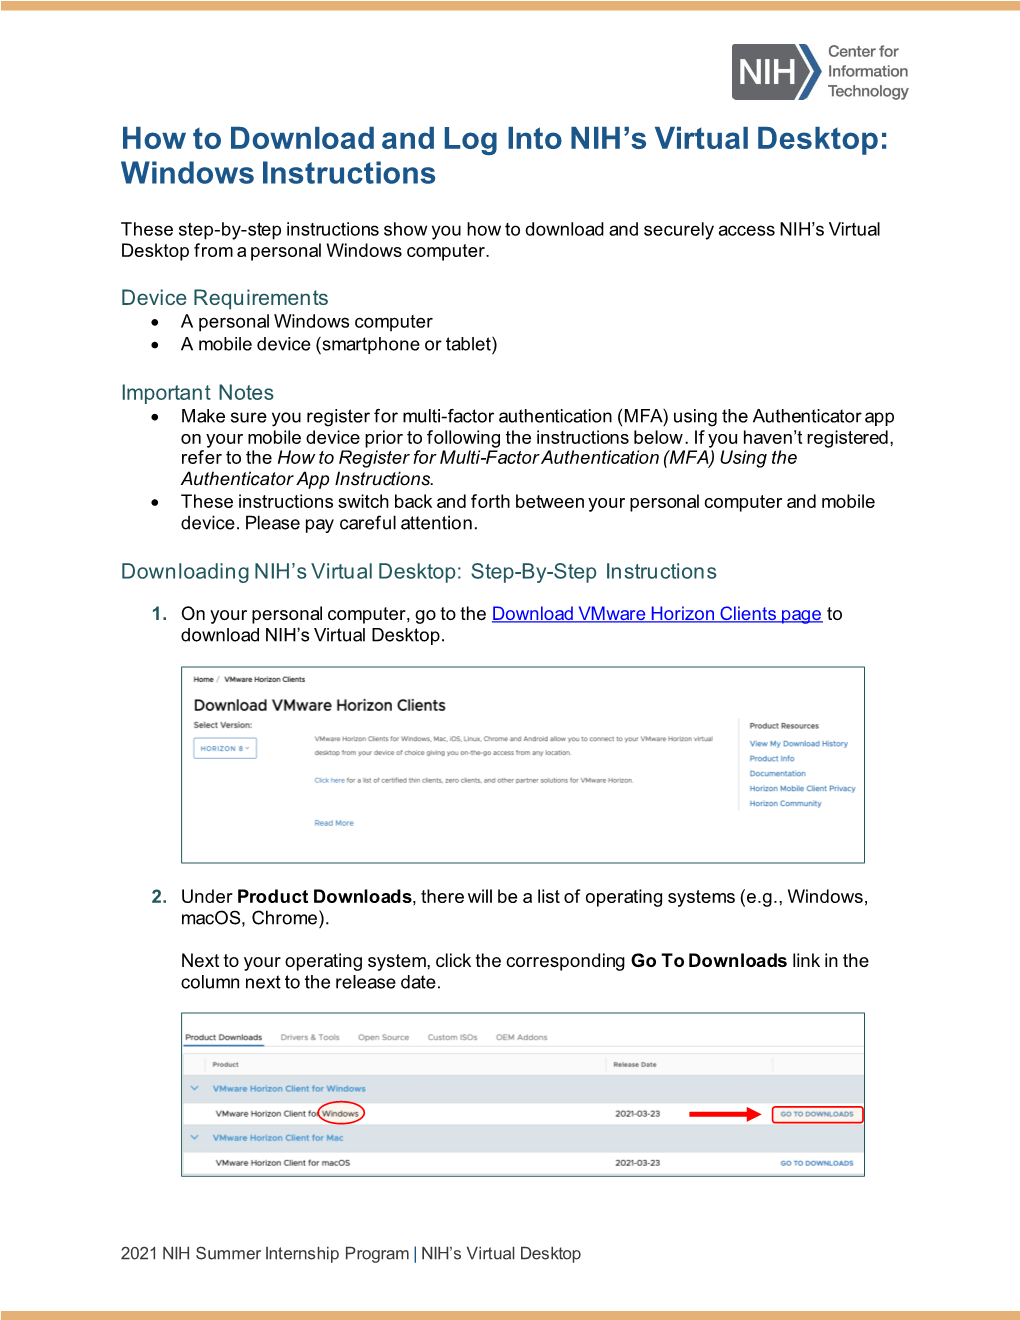 How to Download and Login to NIH's Virtual Desktop: WINDOWS Instructions